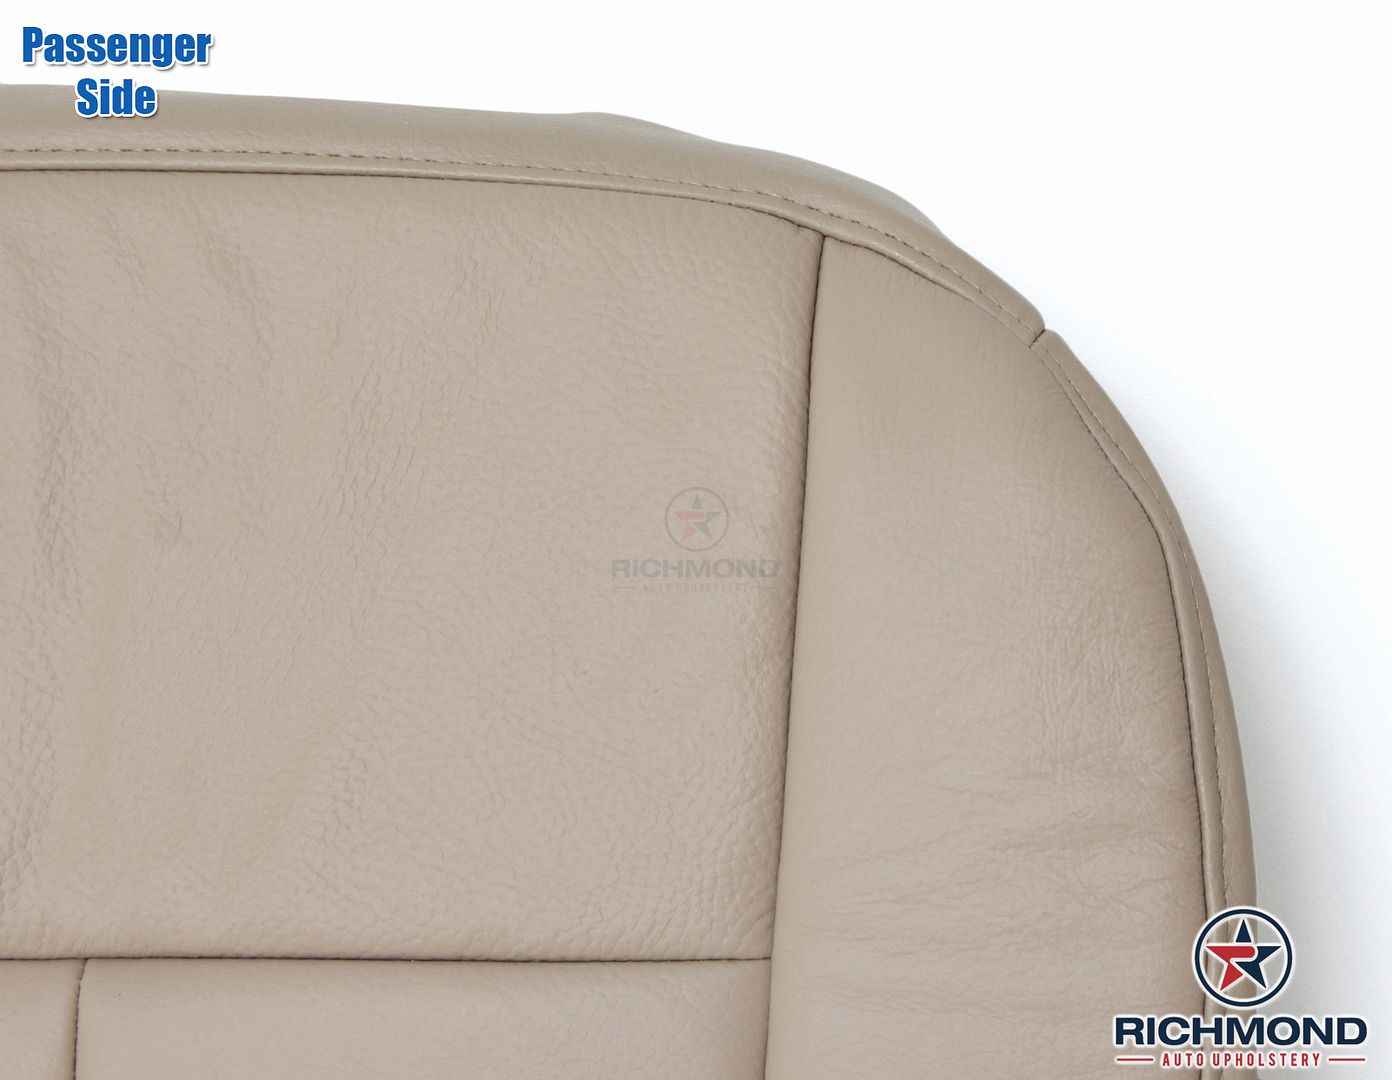 2007 Expedition Eddie Bauer Driver Bottom Leather/Vinyl Seat Cover two Tone Tan